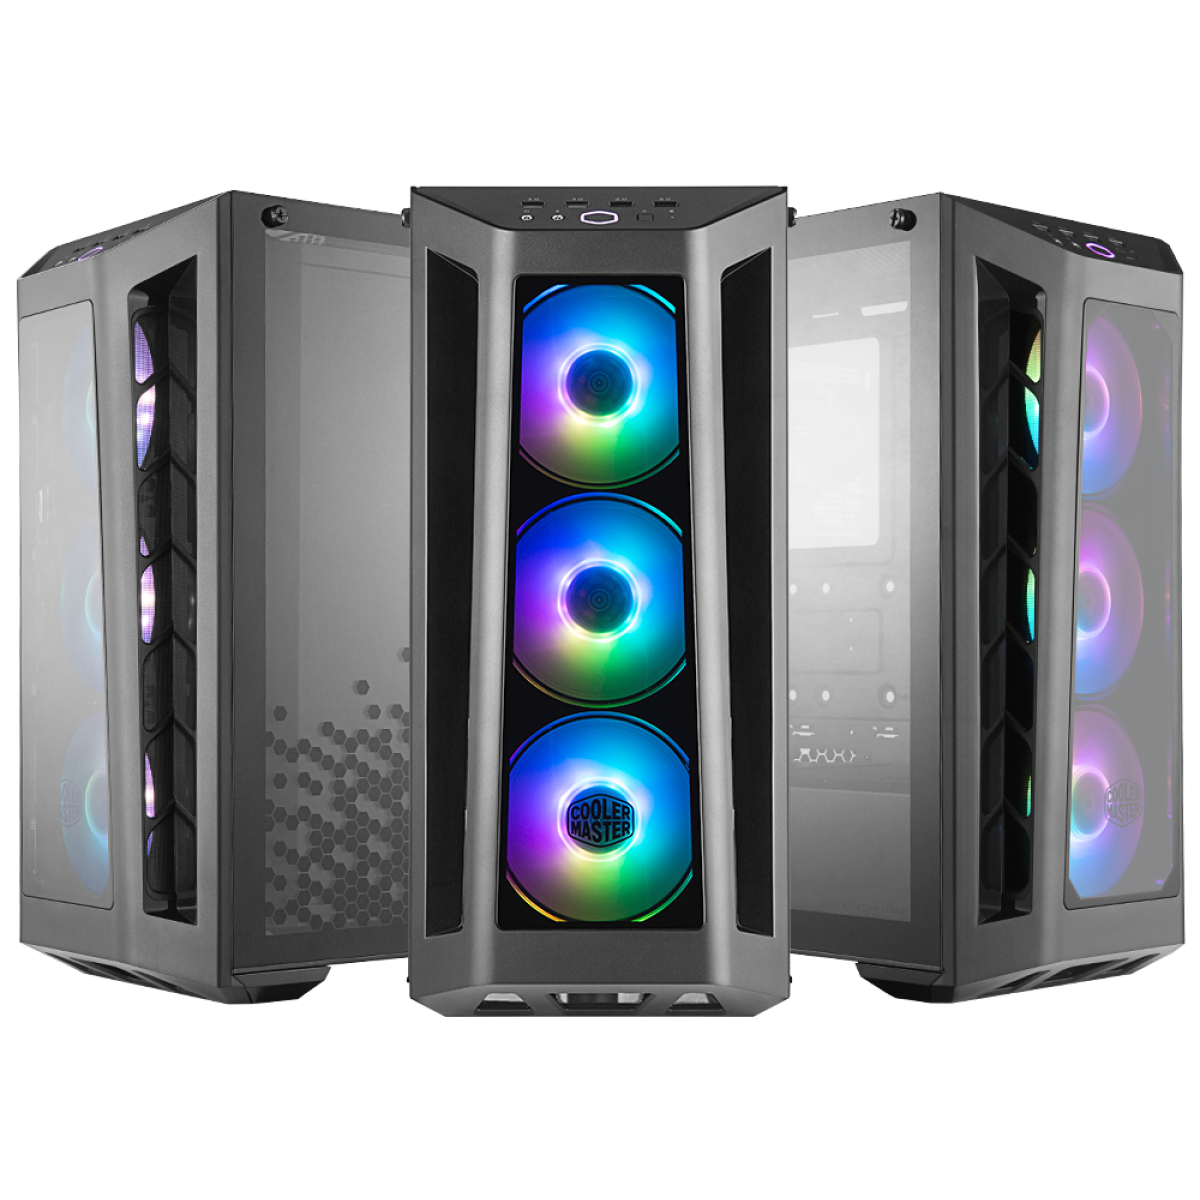 COOLER MASTER MASTERBOX MB530P Mid Tower Tempered Glass Gaming Case ...